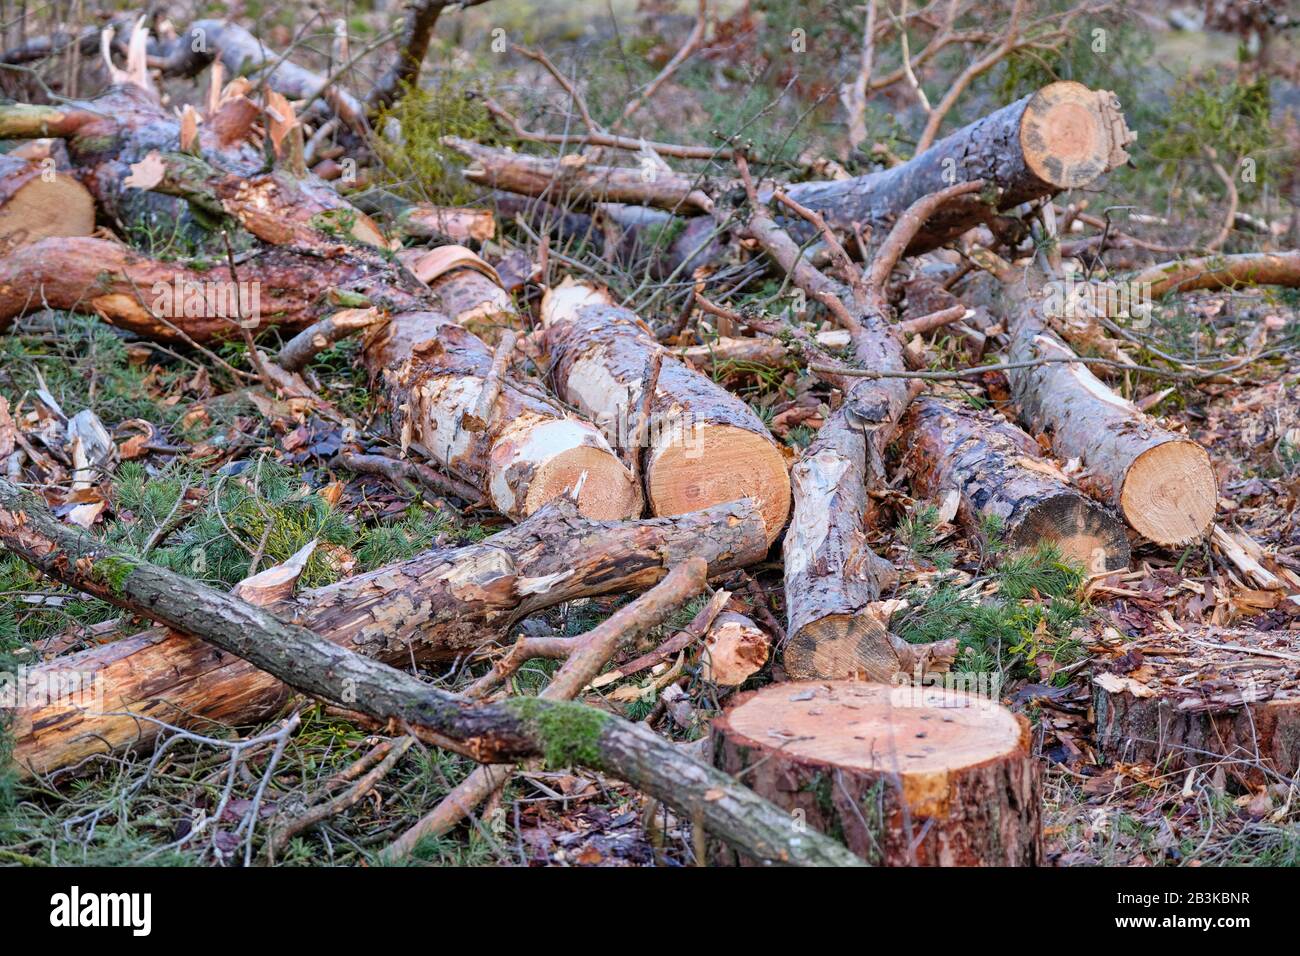 Landscape in the Franconian forest after forestry work because of pest infestation with parts of felled trees lying on the ground. Seen in Bavaria, Ge Stock Photo